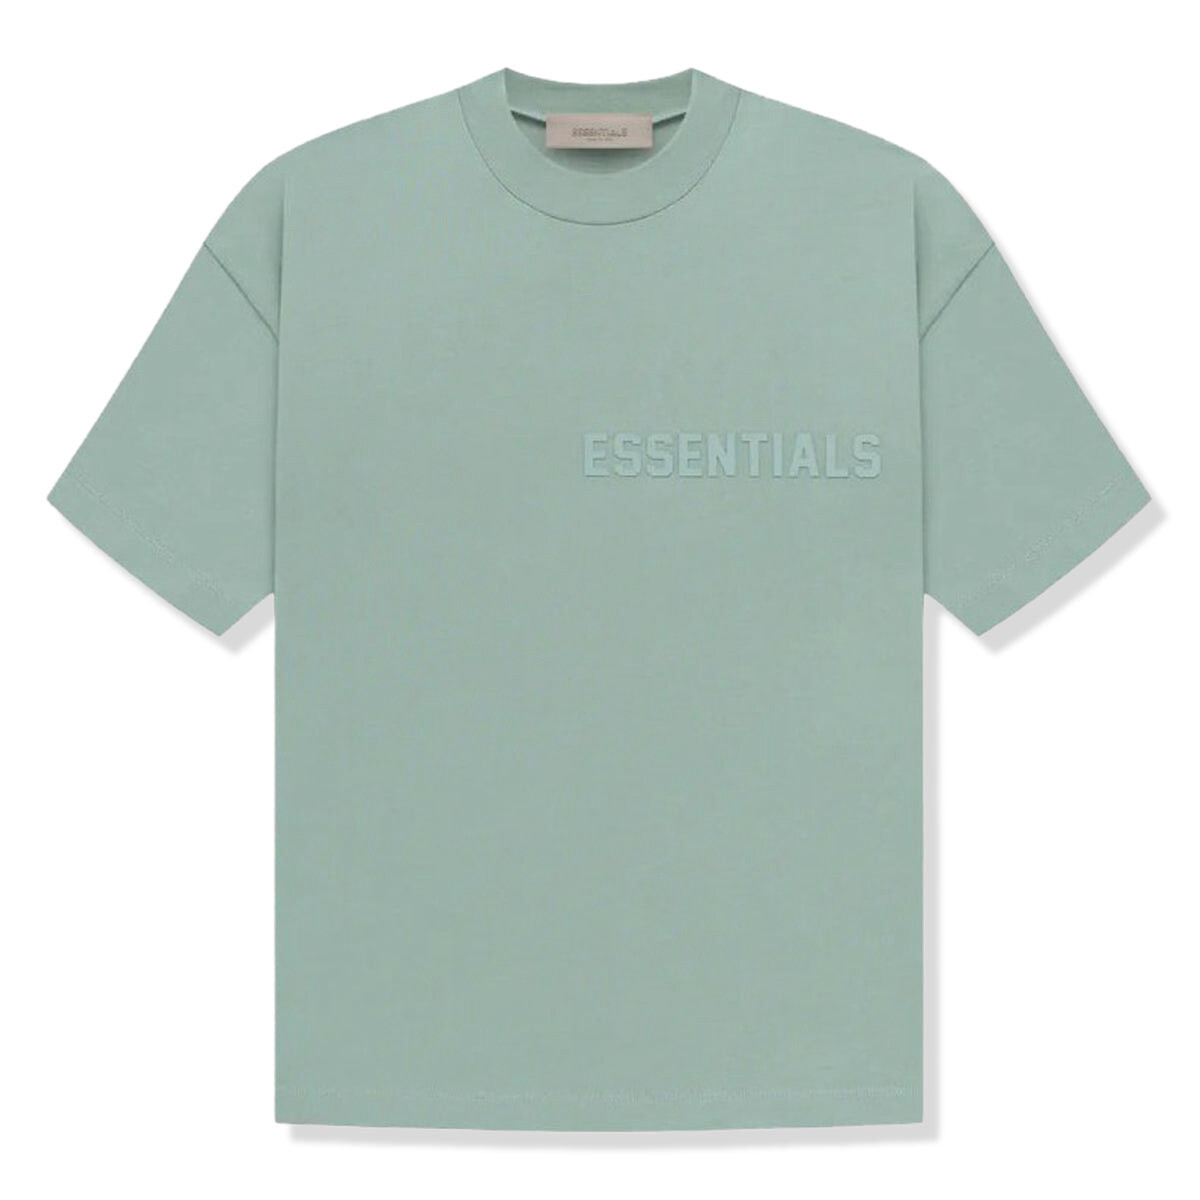 FEAR OF GOD Essentials SS T-Shirt Sycamore